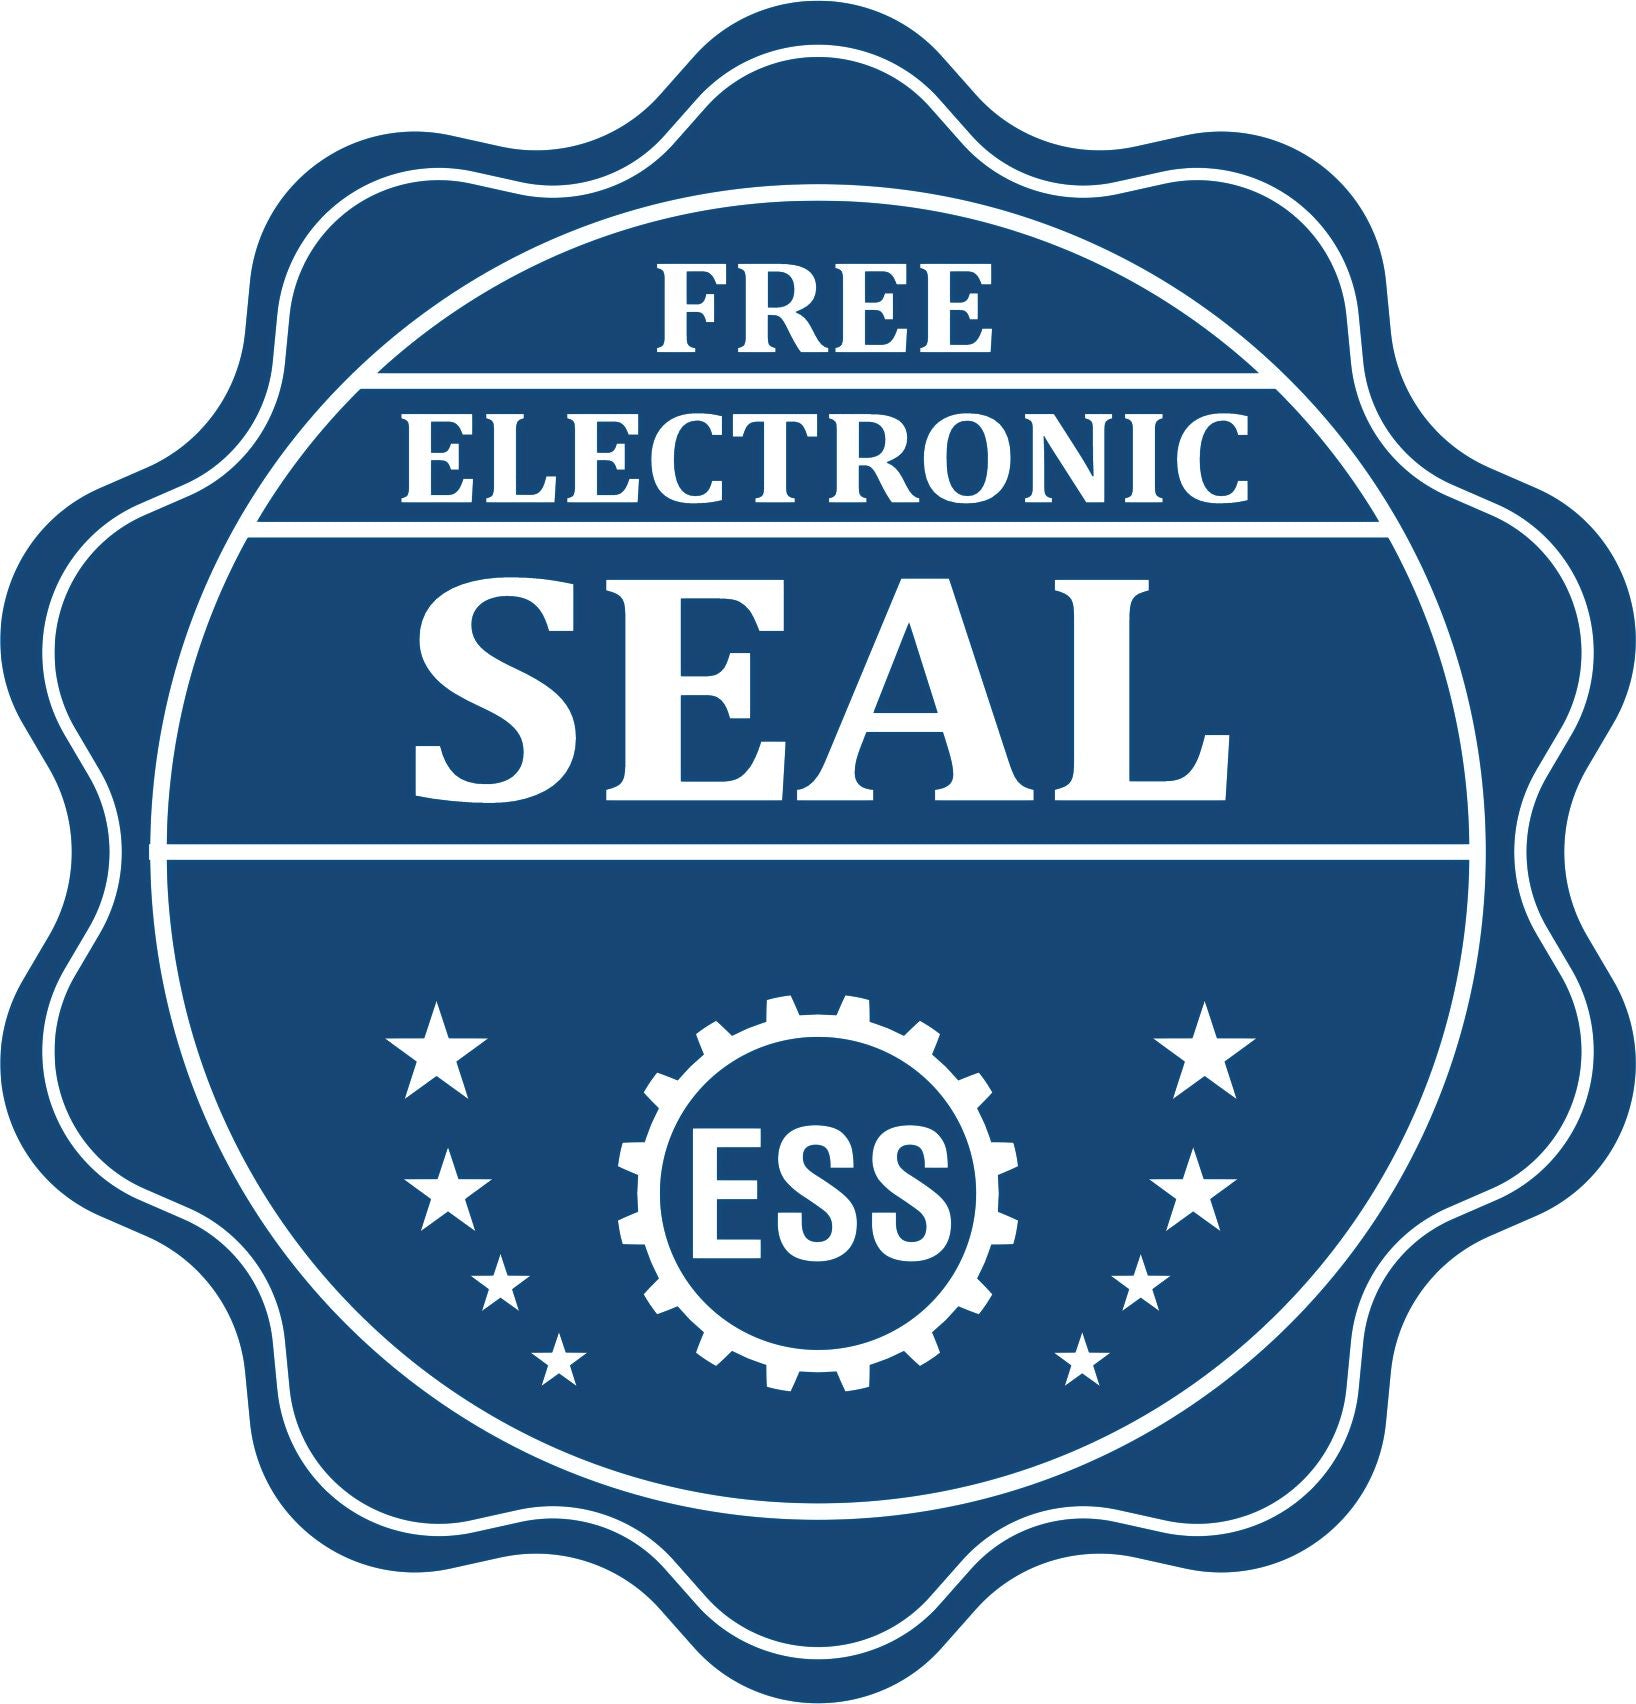 A badge showing a free electronic seal for the State of Hawaii Soft Land Surveyor Embossing Seal with stars and the ESS gear on the emblem.